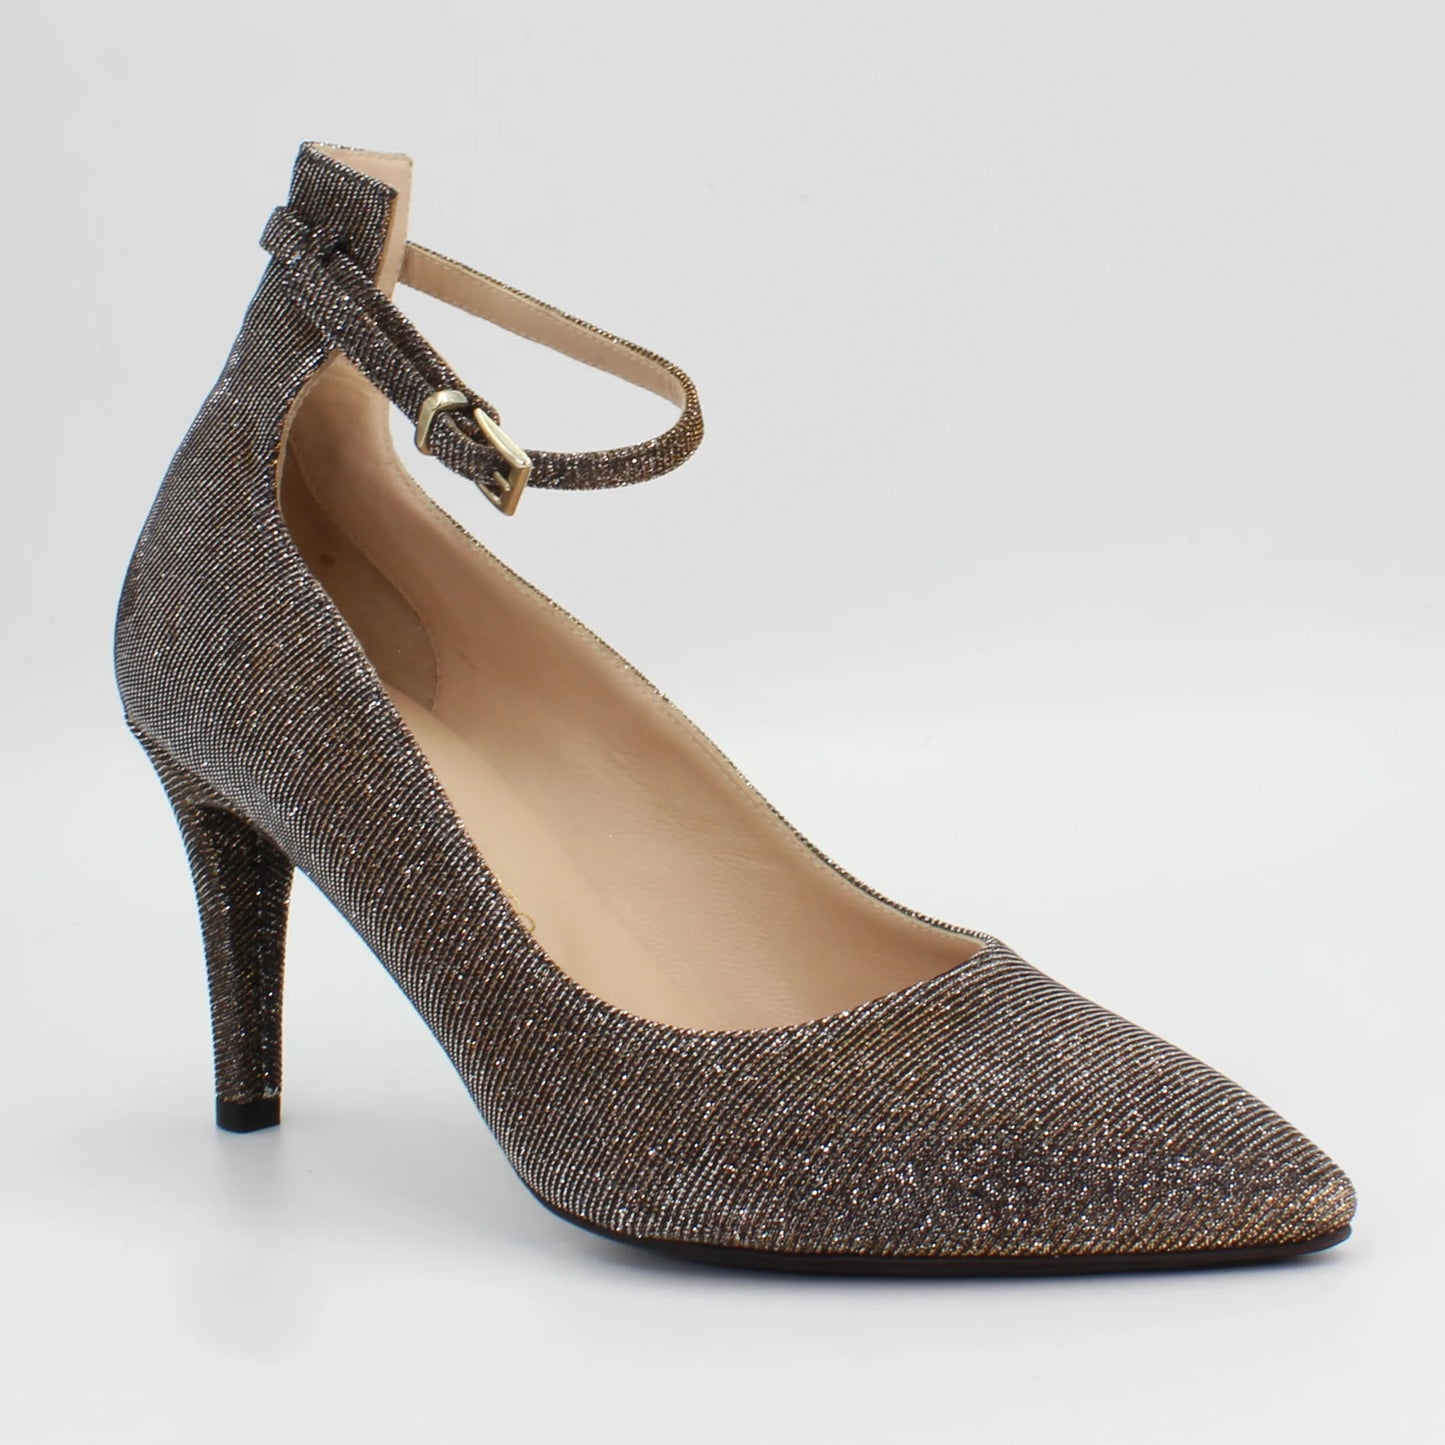 Ladies Glittering Court Shoe. Genuine calf leather and fabric upper and leather sole. made in Italy.